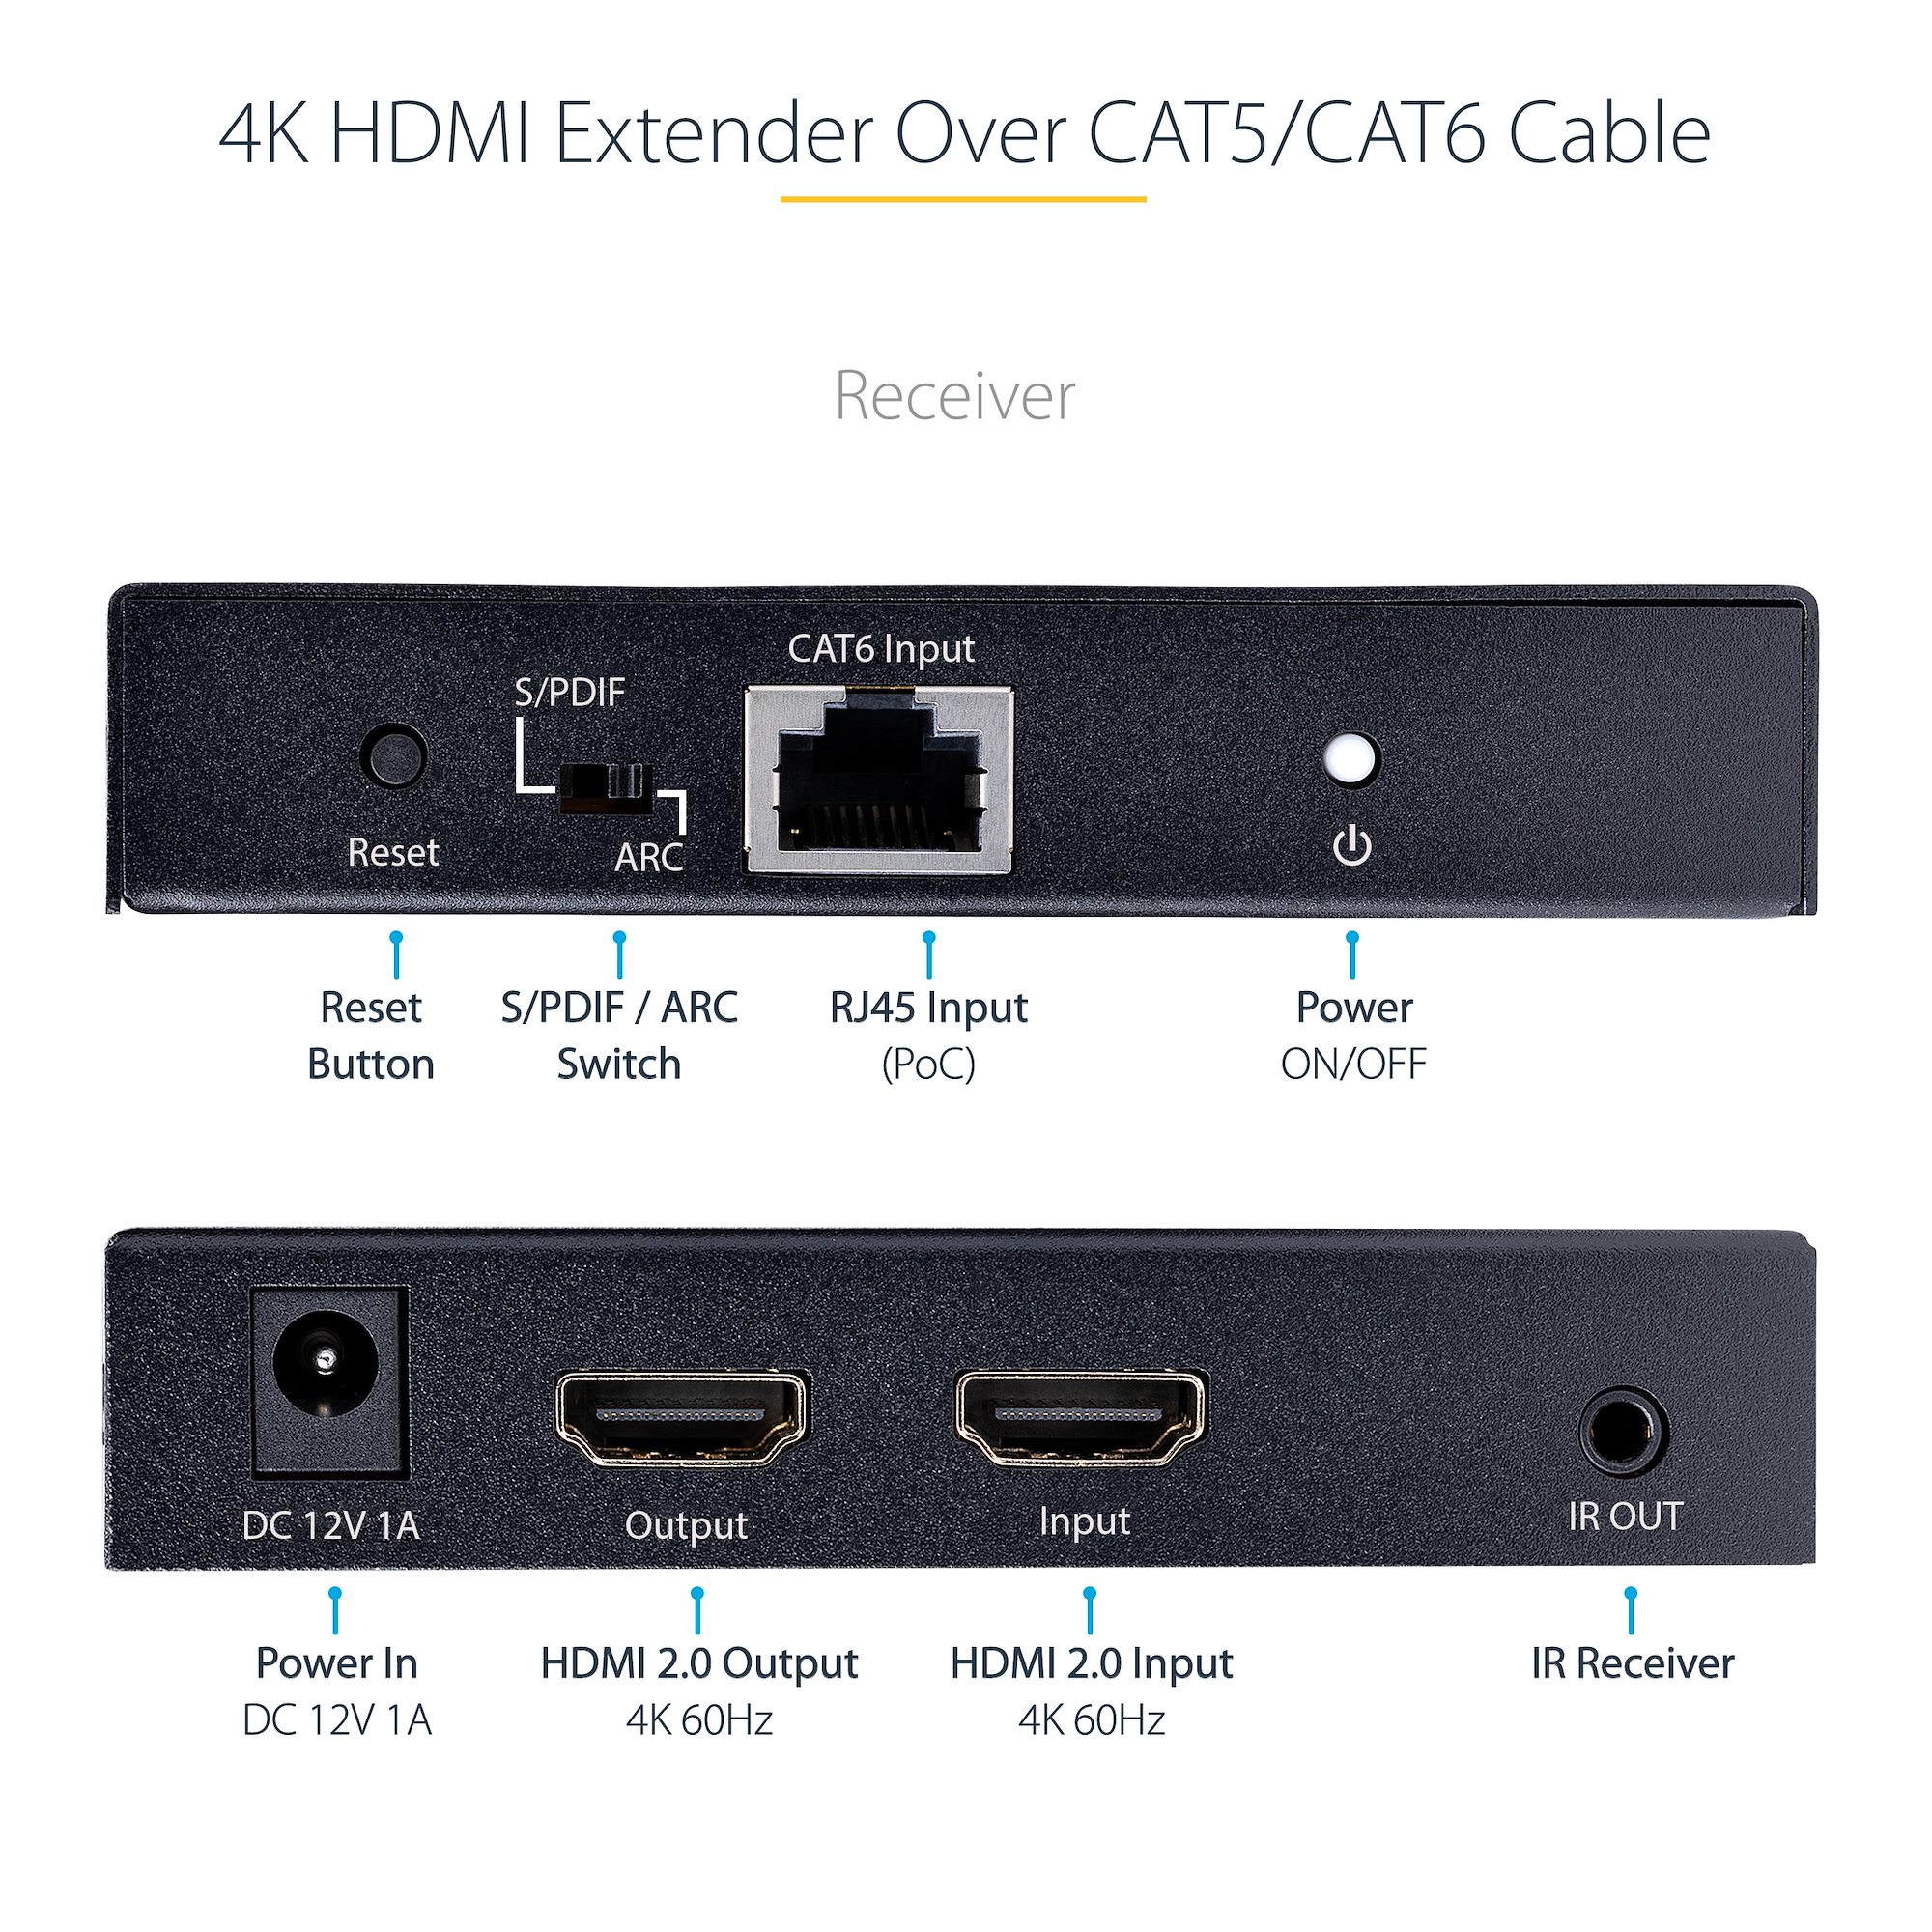 Daisy Chain HDMI Extender 1080P Up to 400 FT - J-Tech Digital